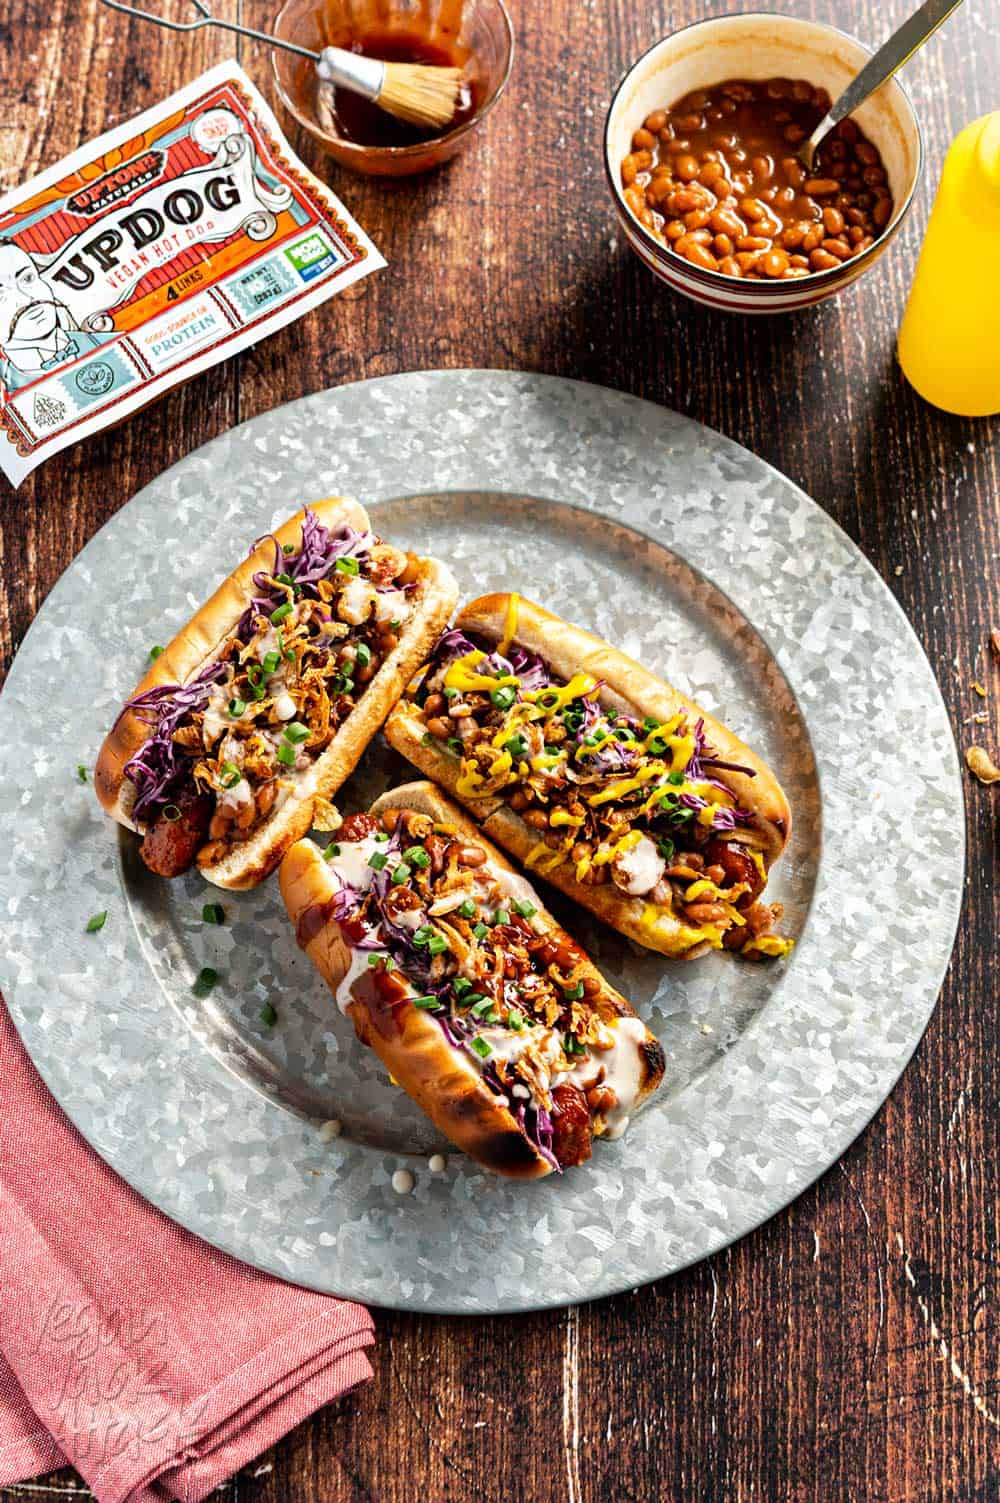 Three loaded vegan hot dogs on a steel plate and wood table